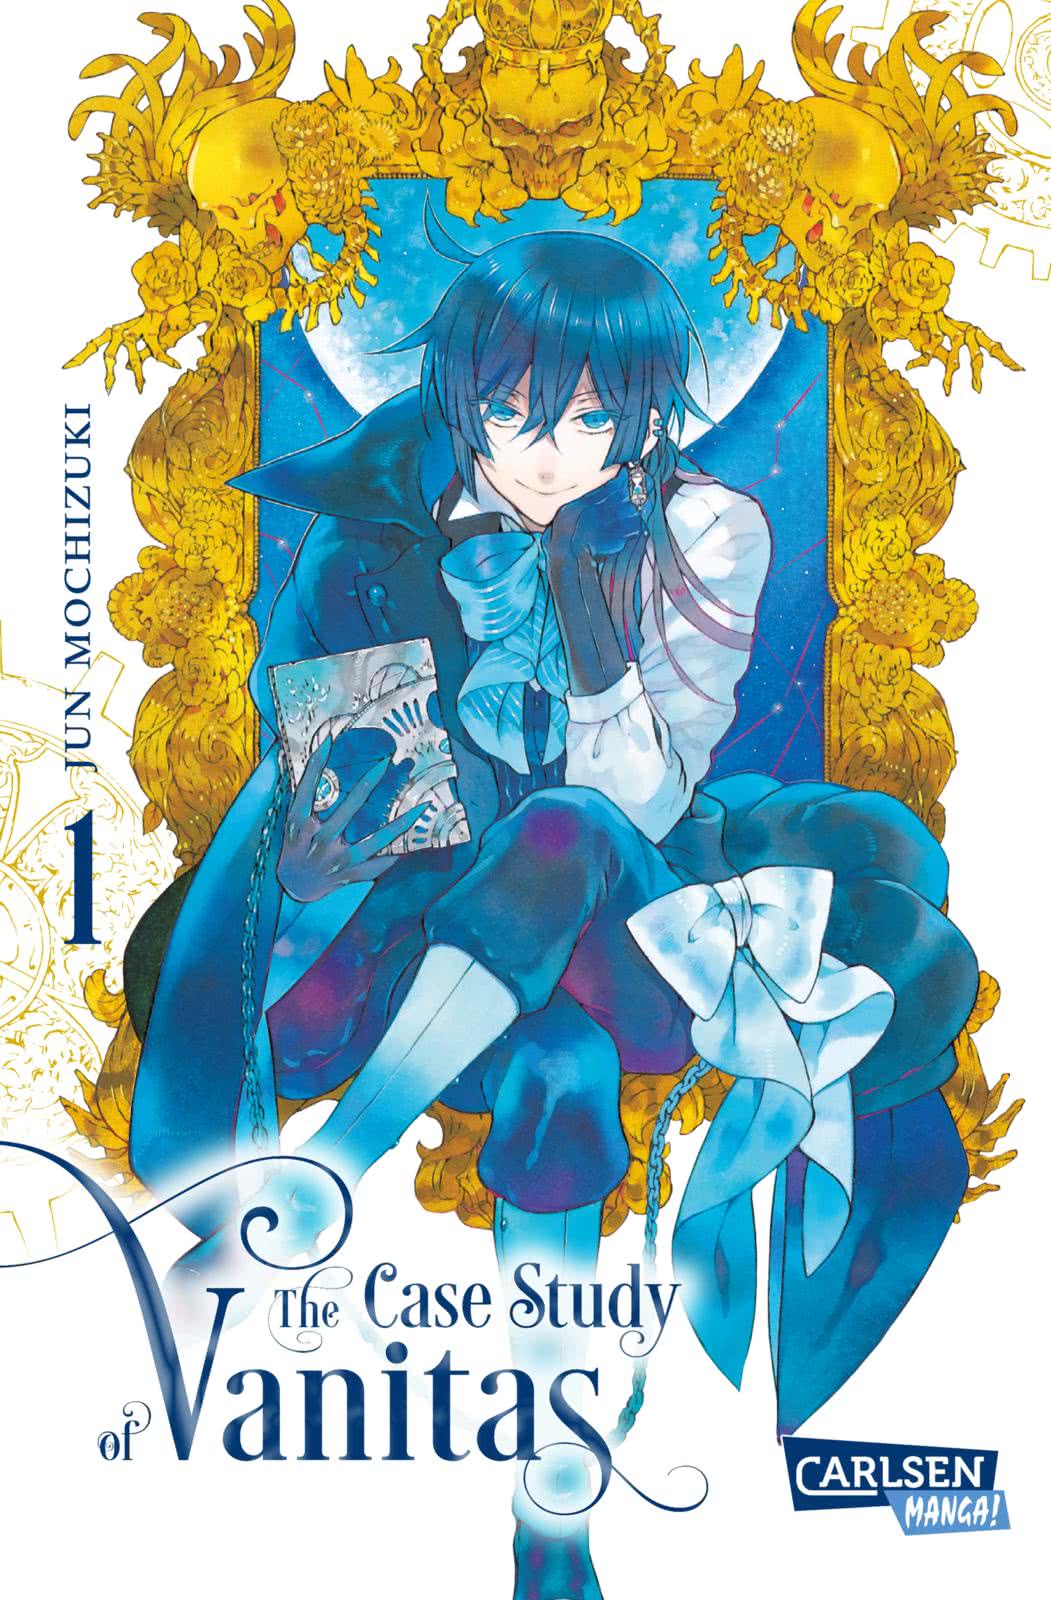 what is the case study of vanitas rated